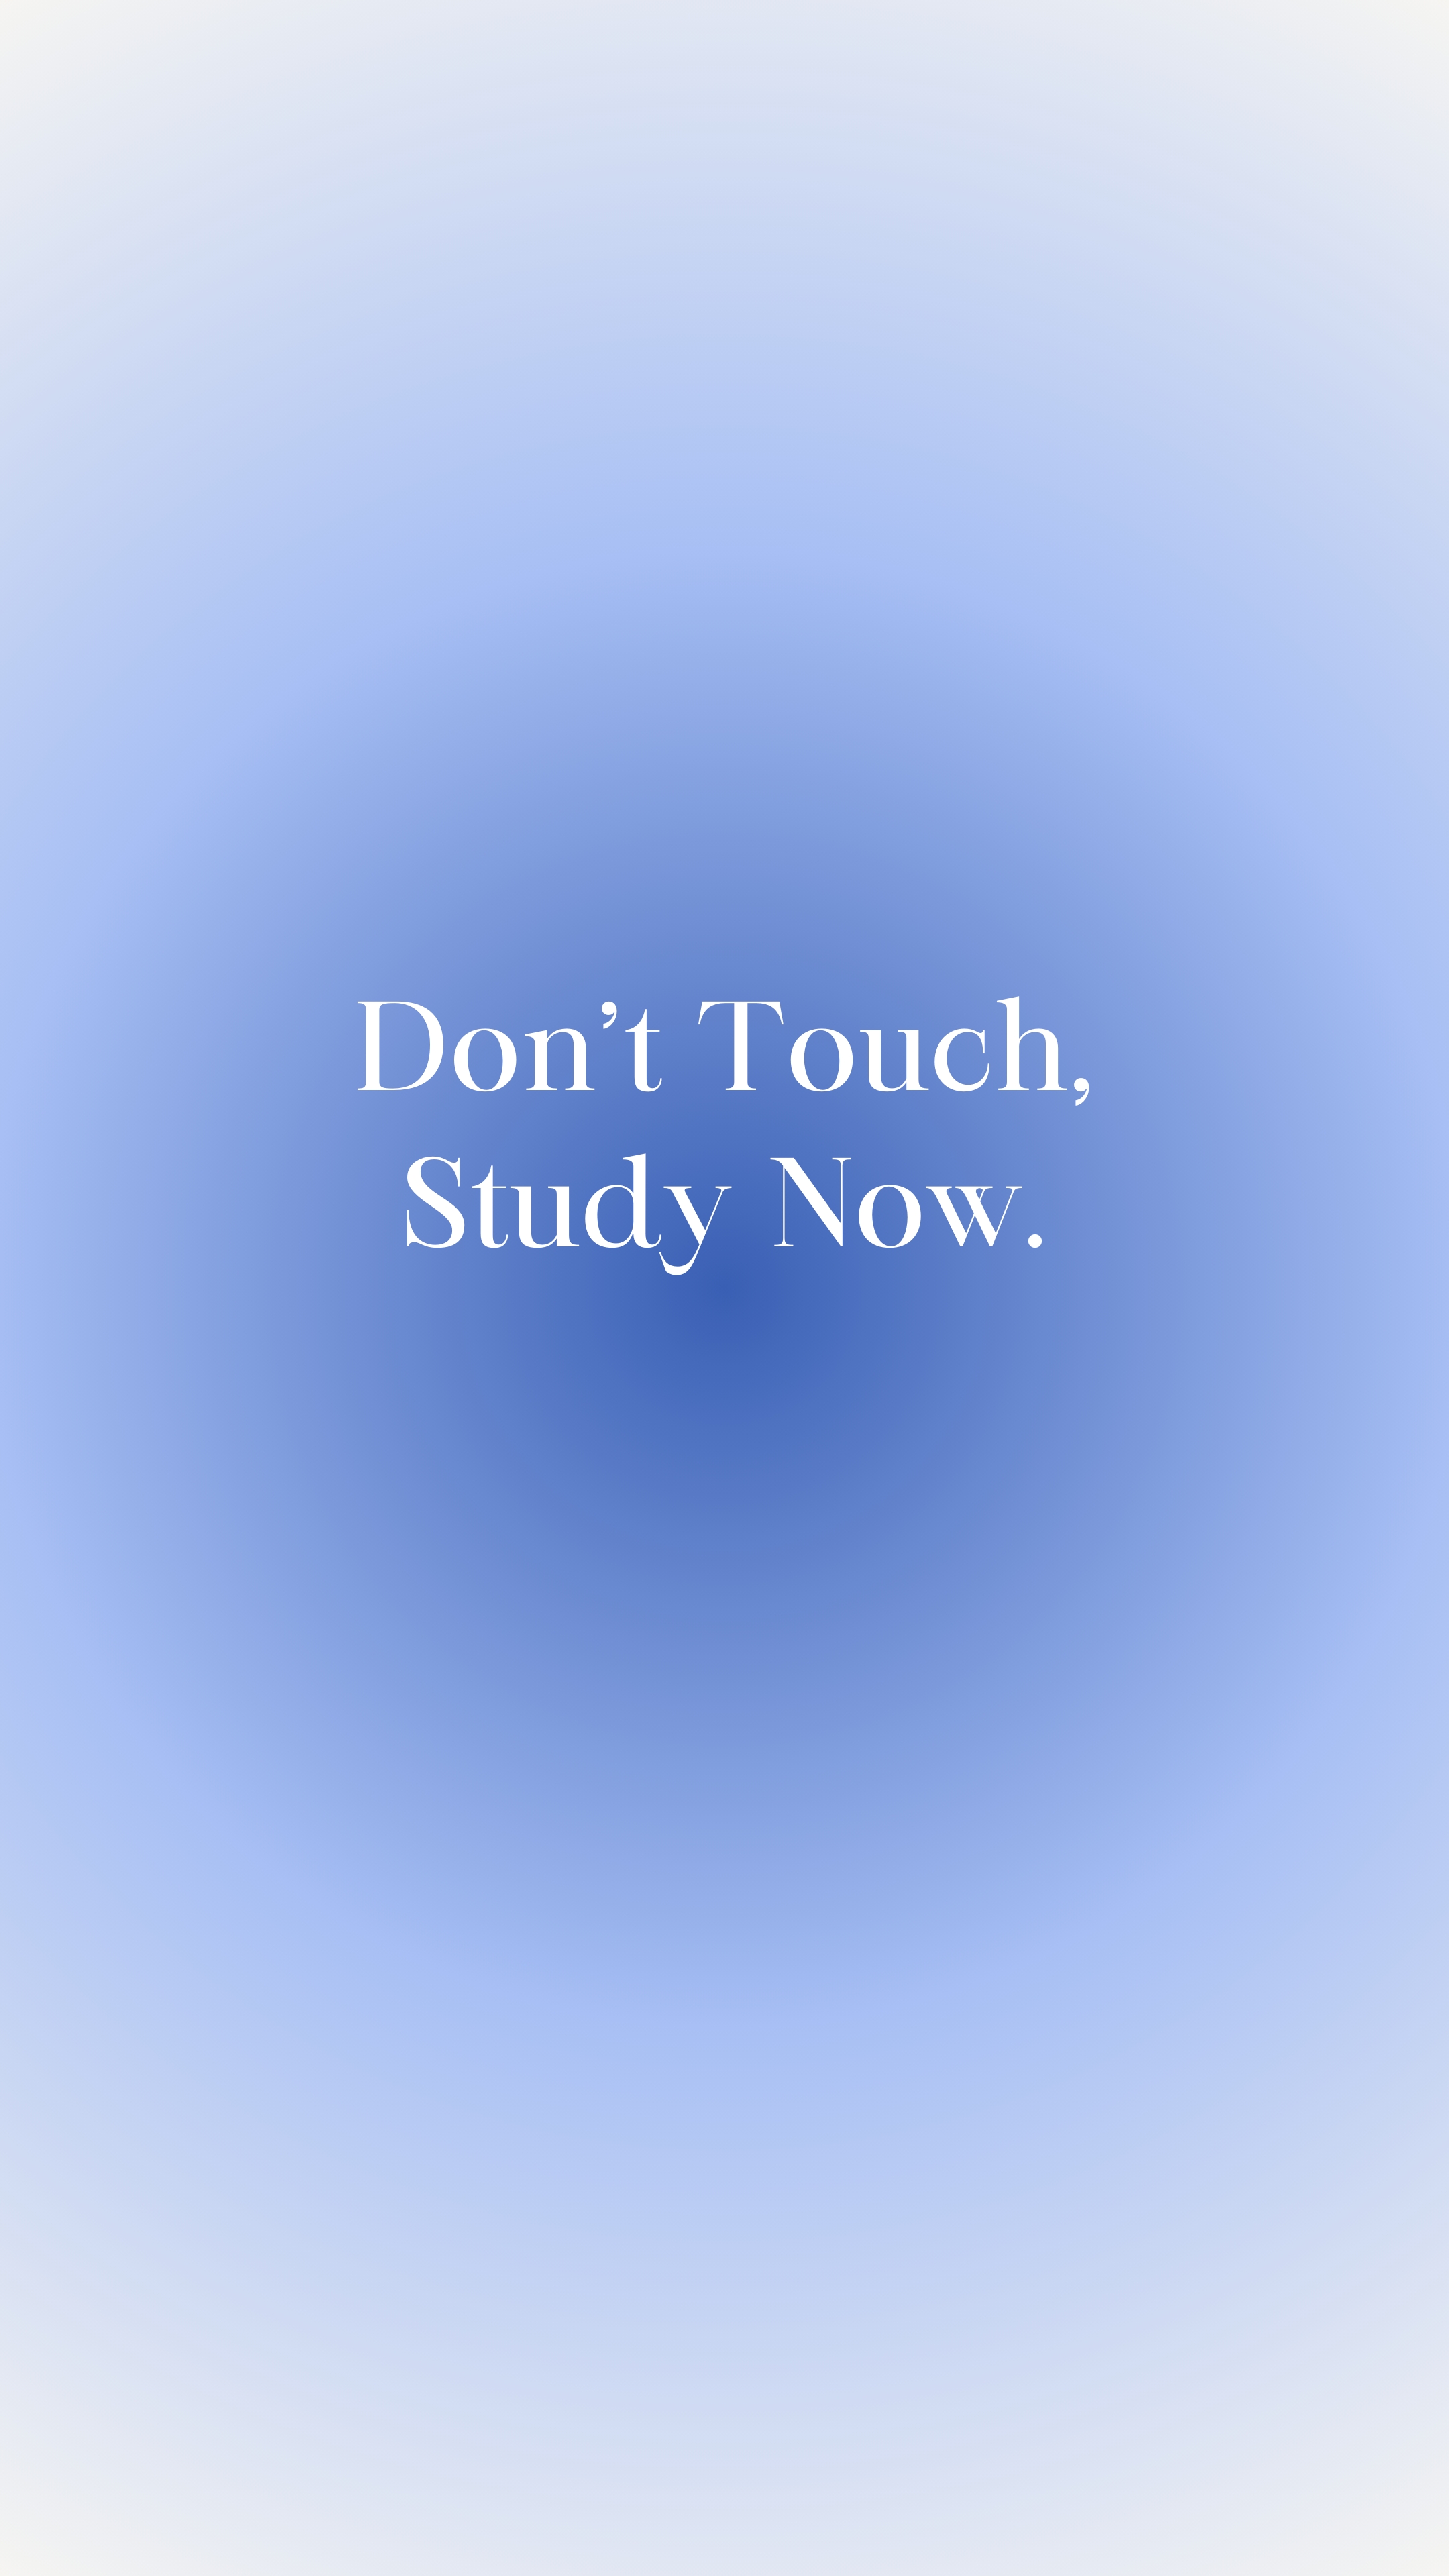 Don't Touch, Study Now Taustakuva[ef04016dba344bd28c07]